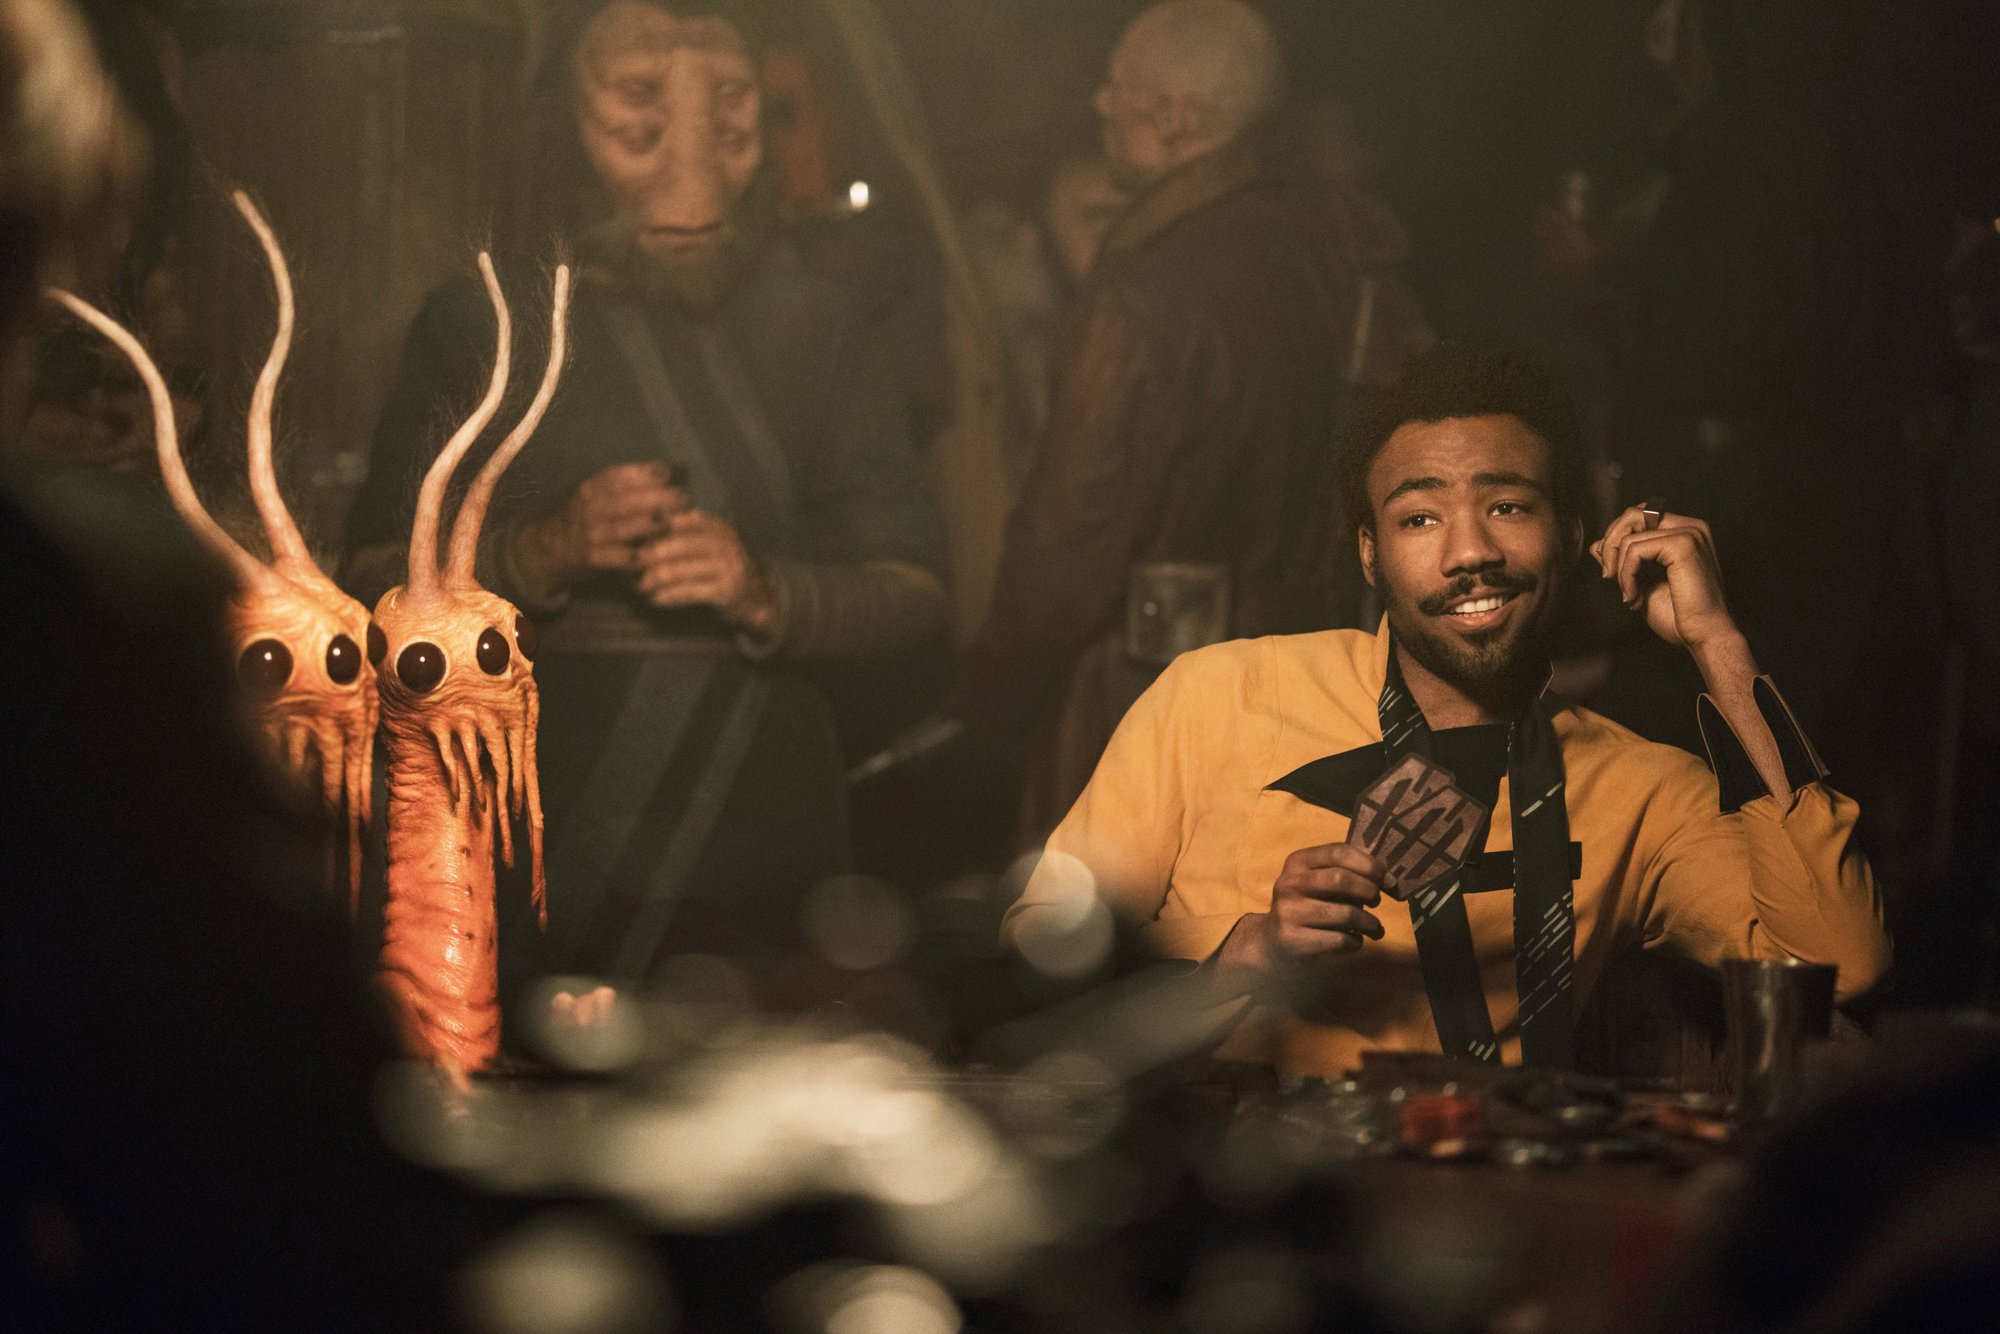 Donald Glover stars as Lando Calrissian in Walt Disney Pictures' Solo: A Star Wars Story (2018)